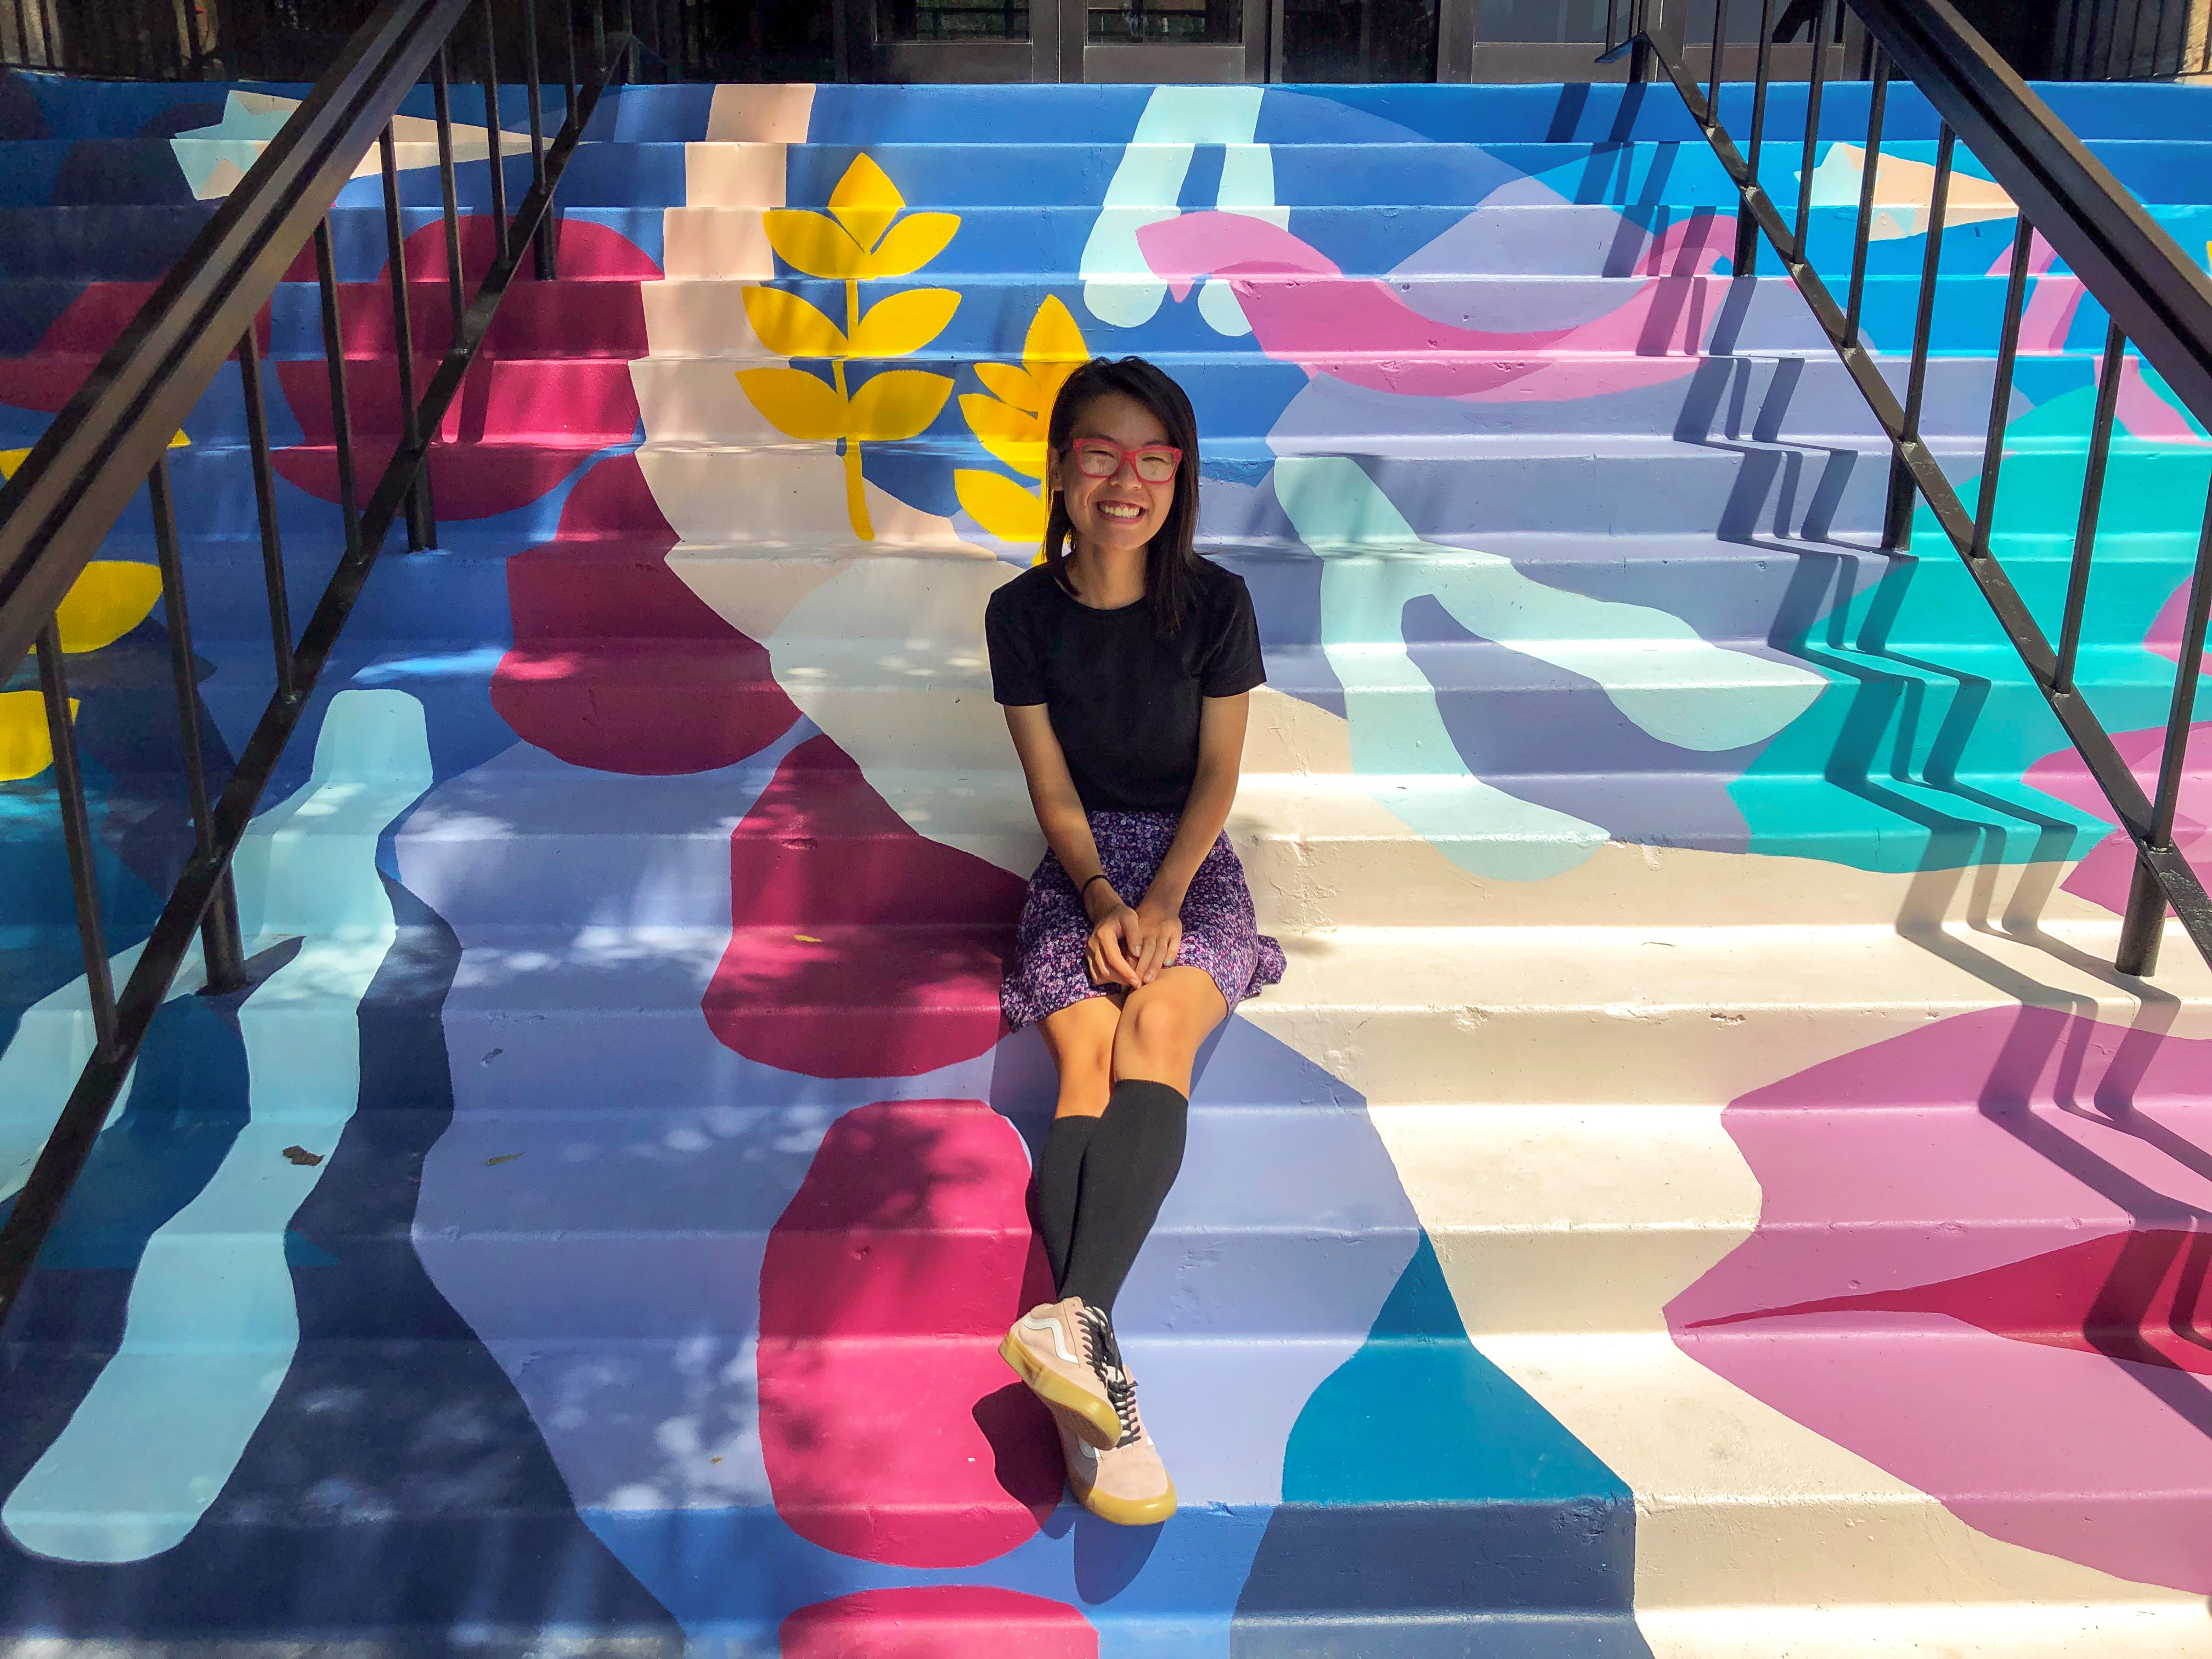 Sarah Myose's mural "Dreams and wishes" on the stairs of Clinton Hall